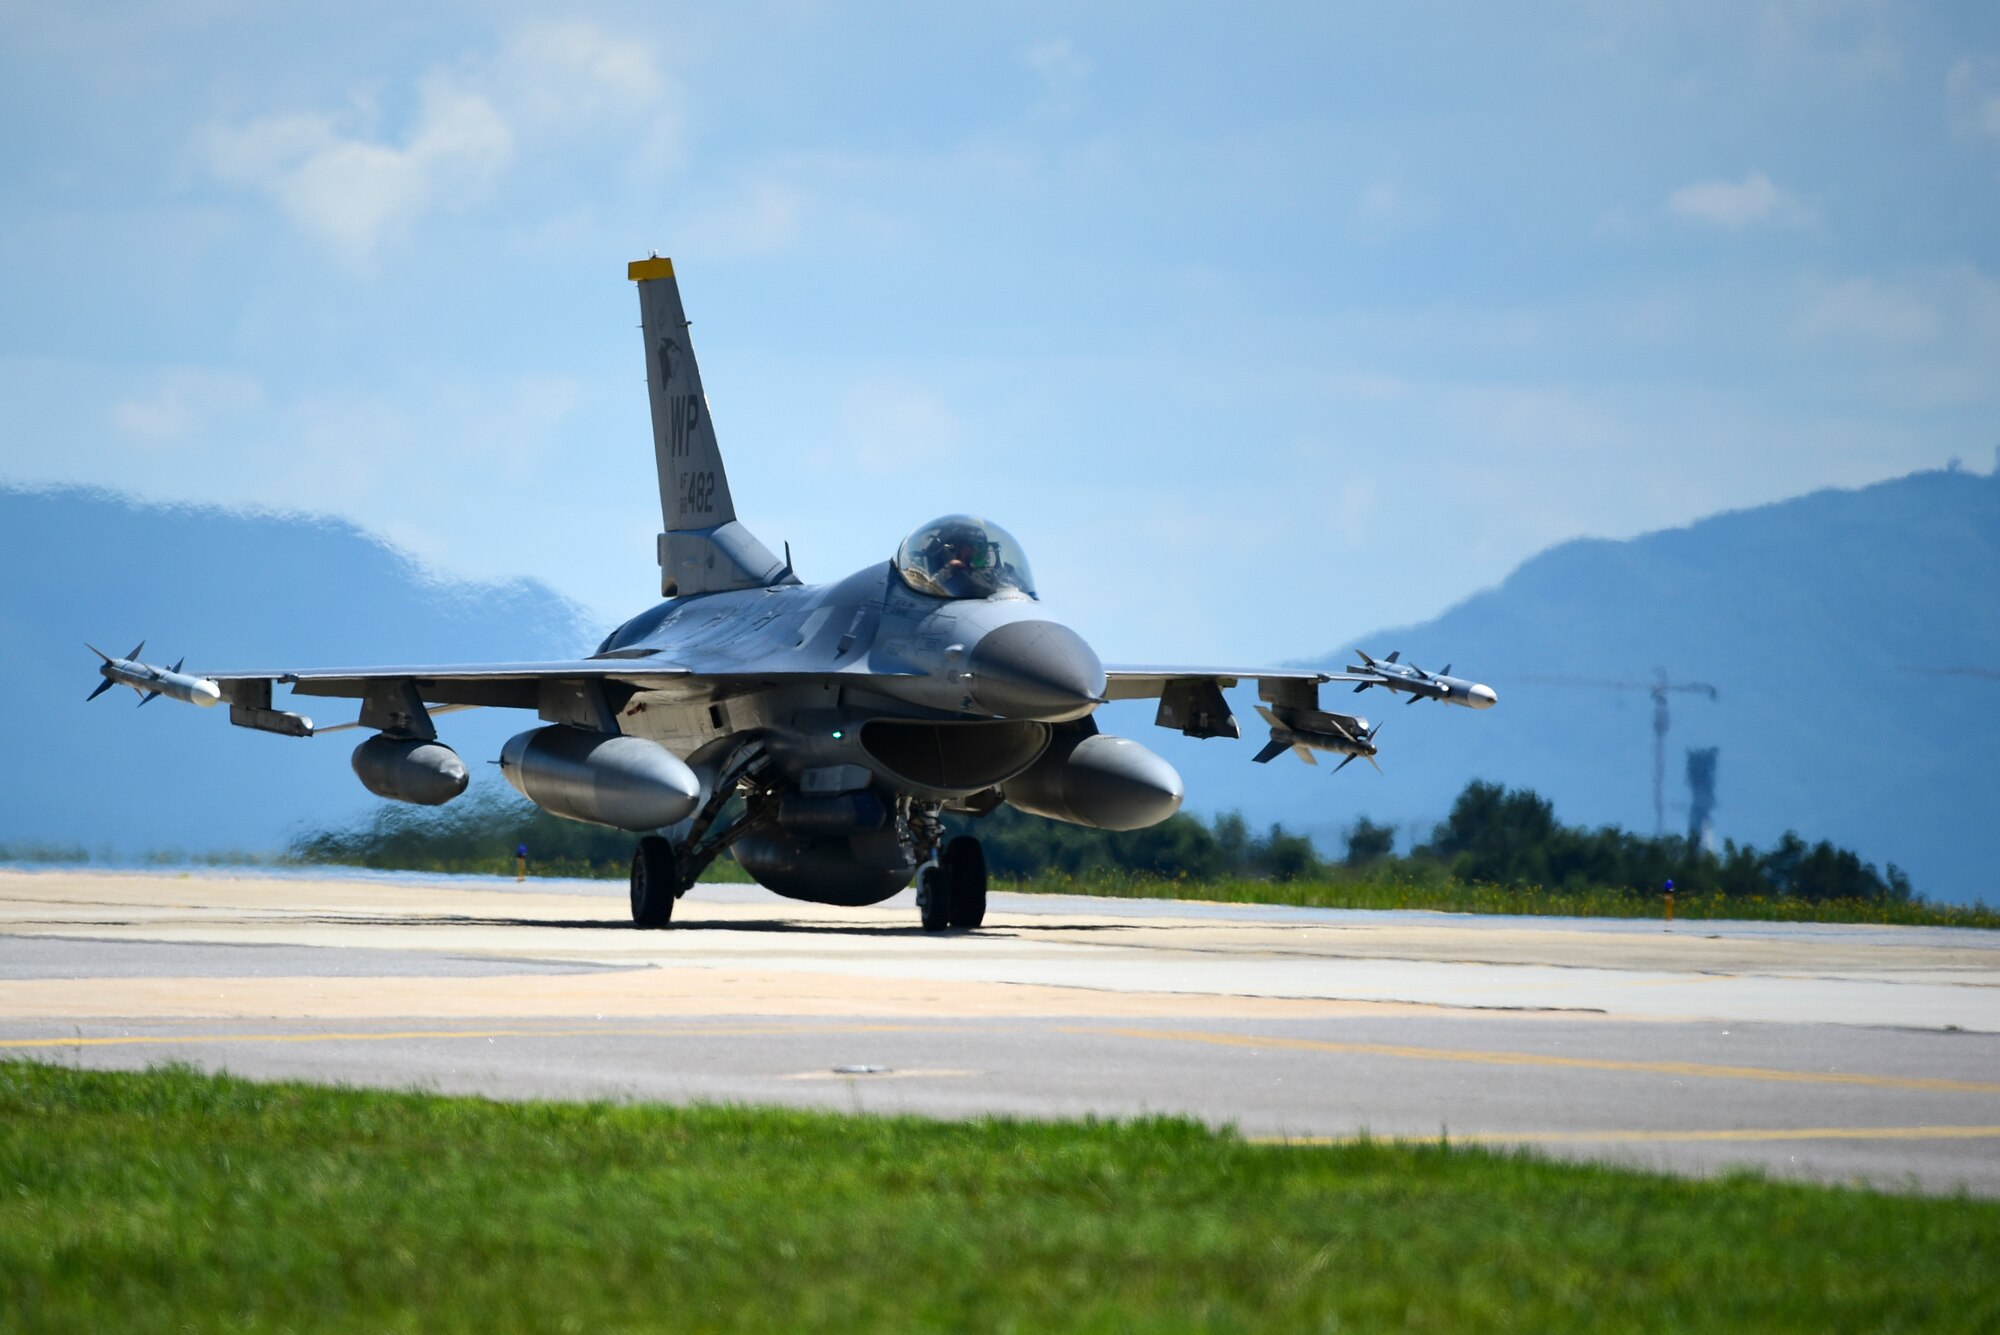 An F-16 Fighting Falcon taxis at Kunsan Air Base, Republic of Korea, July 16, 2021. The last of the 8th Fighter Wing jets returned home after supporting a month-long multinational training event at Red Flag-Alaska 21-2, while practicing Agile Combat Employment tactics. (U.S. Air Force photo by Senior Airman Suzie Plotnikov)